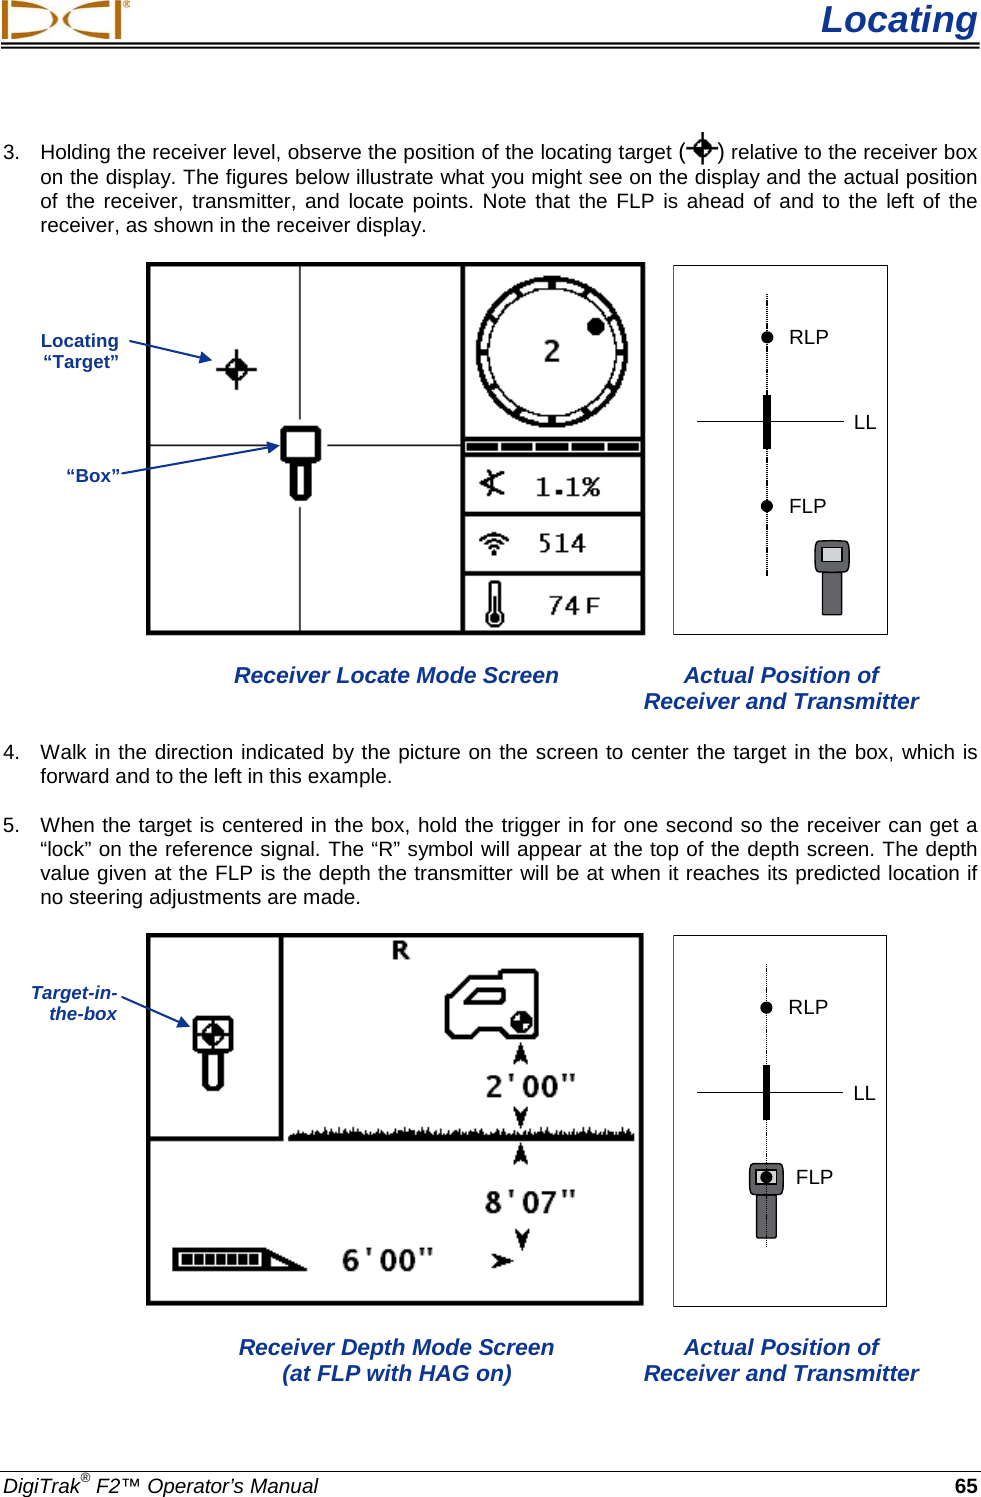  Locating DigiTrak® F2™ Operator’s Manual 65 3. Holding the receiver level, observe the position of the locating target ( ) relative to the receiver box on the display. The figures below illustrate what you might see on the display and the actual position of the receiver, transmitter, and locate points. Note that the FLP is ahead of and to the left of the receiver, as shown in the receiver display.   RLPFLPLL  Receiver Locate Mode Screen Actual Position of        Receiver and Transmitter 4. Walk in the direction indicated by the picture on the screen to center the target in the box, which is forward and to the left in this example. 5. When the target is centered in the box, hold the trigger in for one second so the receiver can get a “lock” on the reference signal. The “R” symbol will appear at the top of the depth screen. The depth value given at the FLP is the depth the transmitter will be at when it reaches its predicted location if no steering adjustments are made.    RLPFLPLL  Receiver Depth Mode Screen Actual Position of     (at FLP with HAG on) Receiver and Transmitter Locating “Target” “Box” Target-in-the-box  